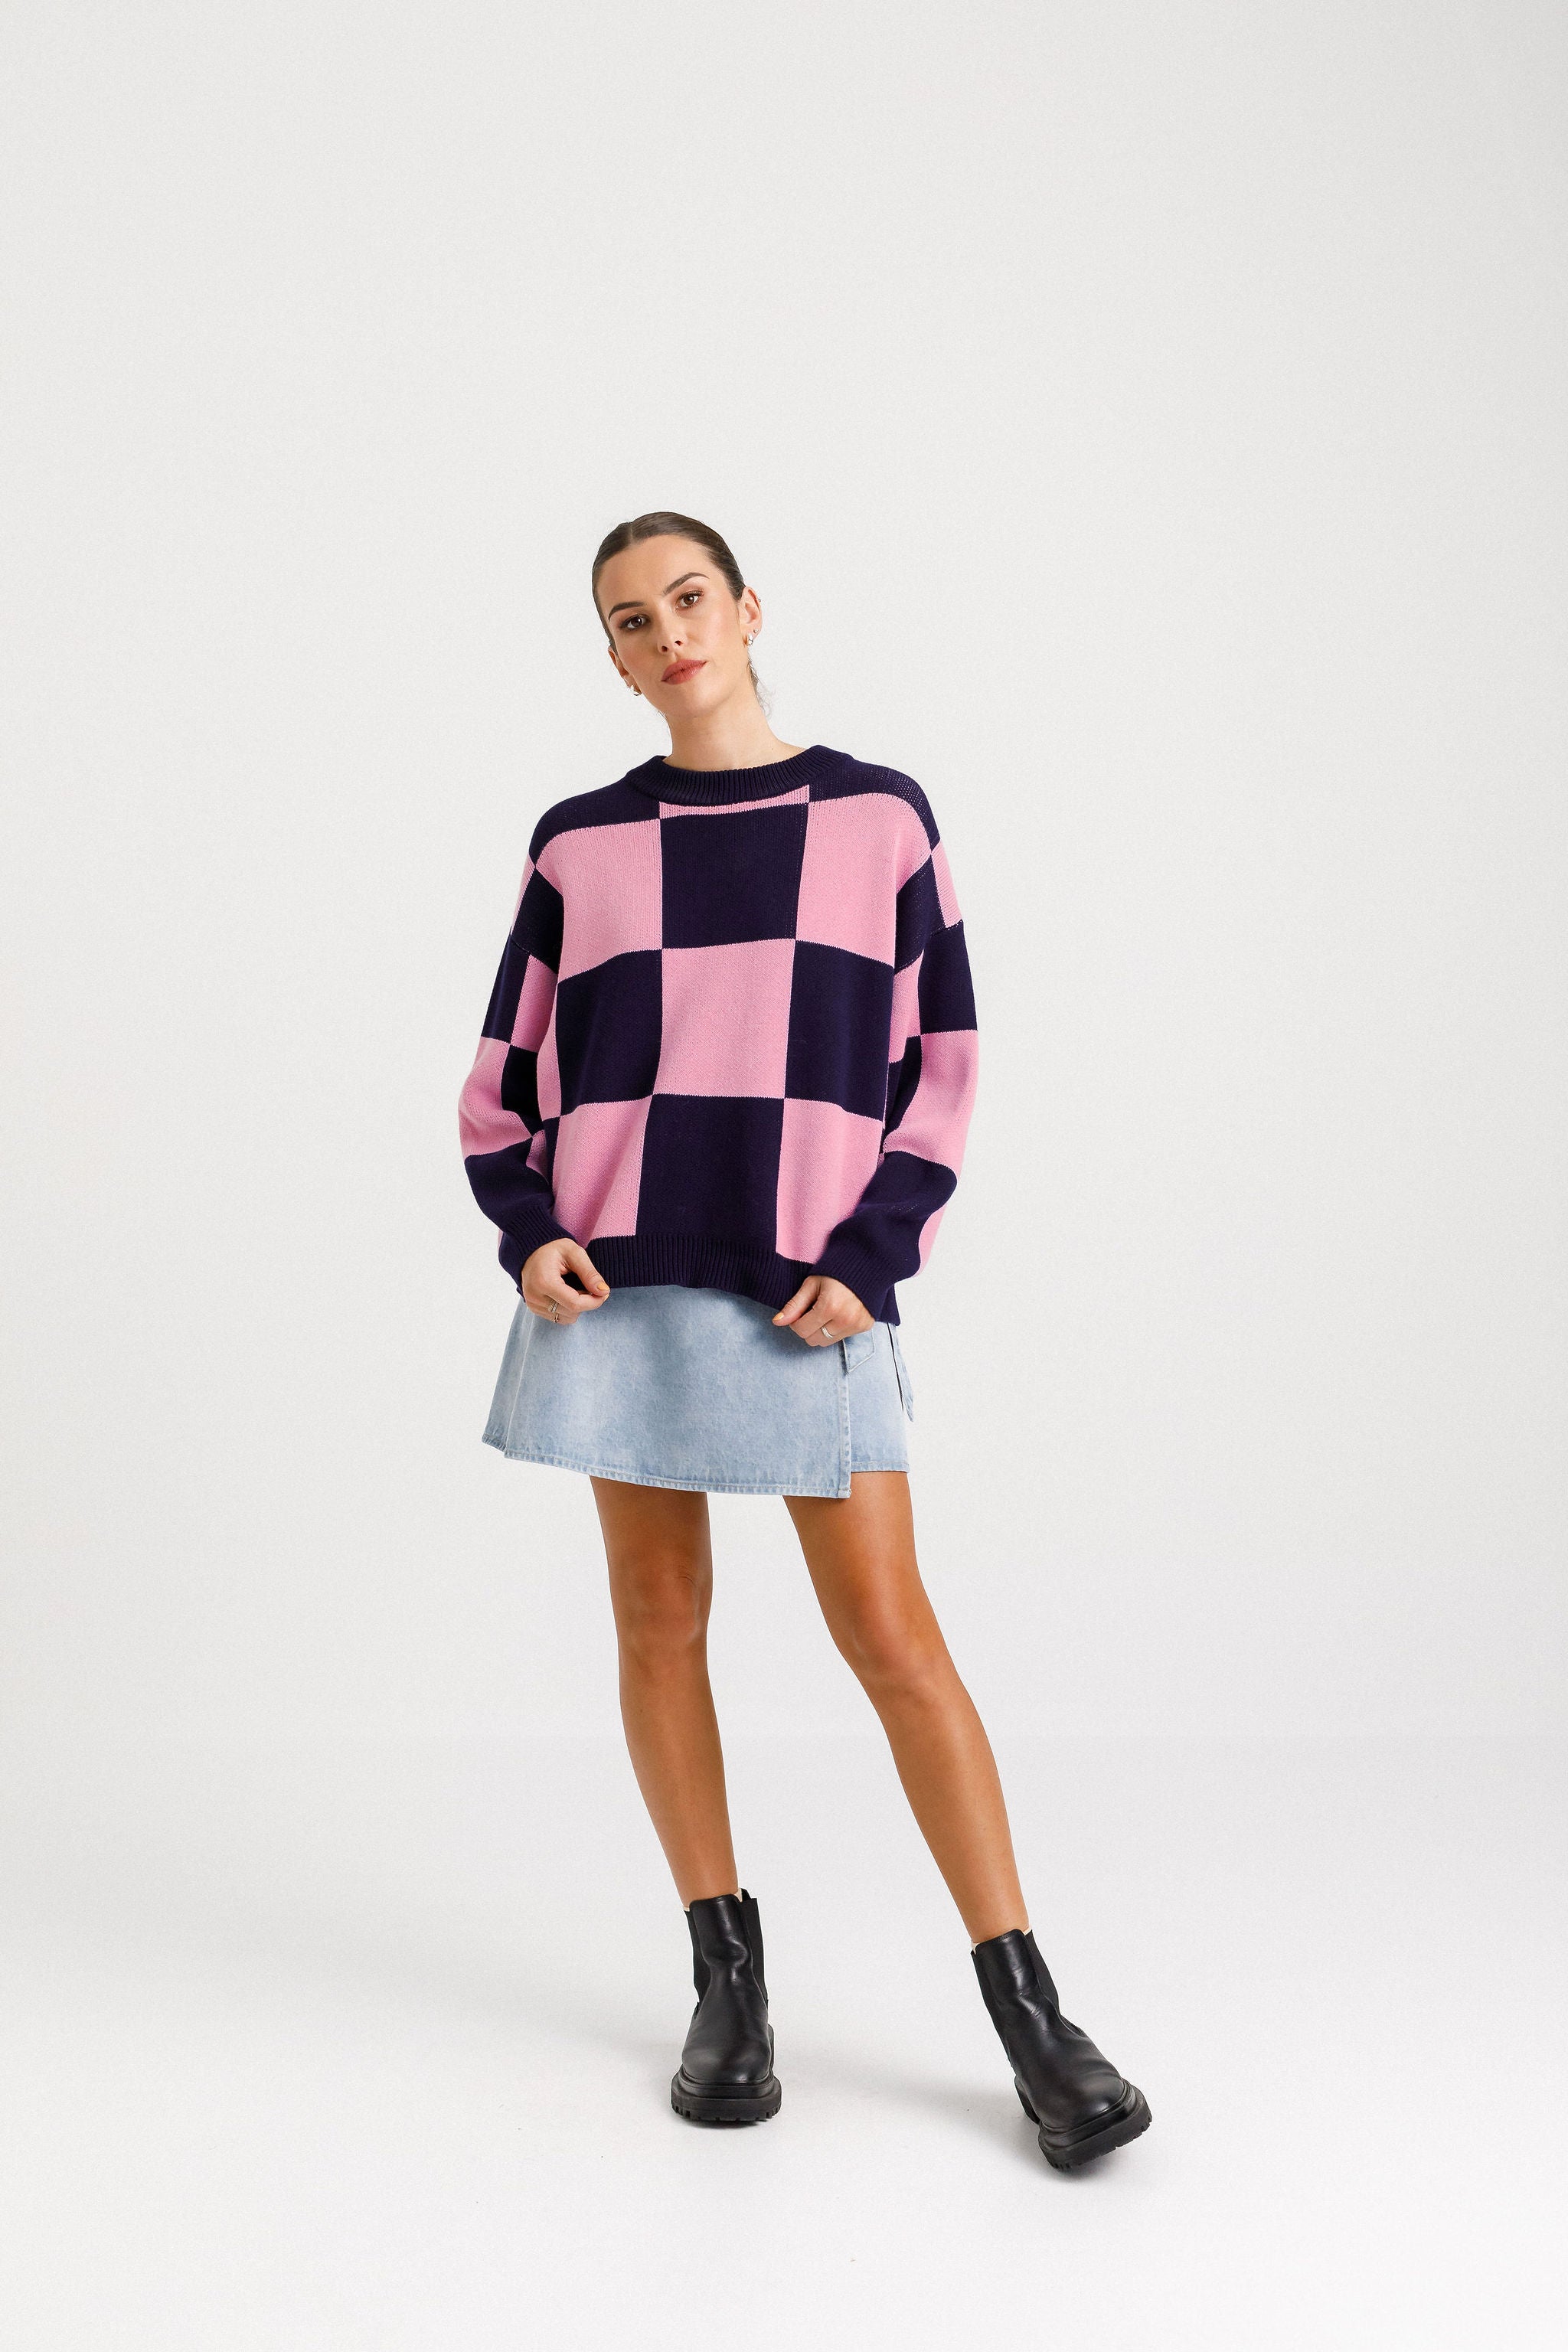 Coming Soon - Cleo Check It Jumper - Ballet Navy